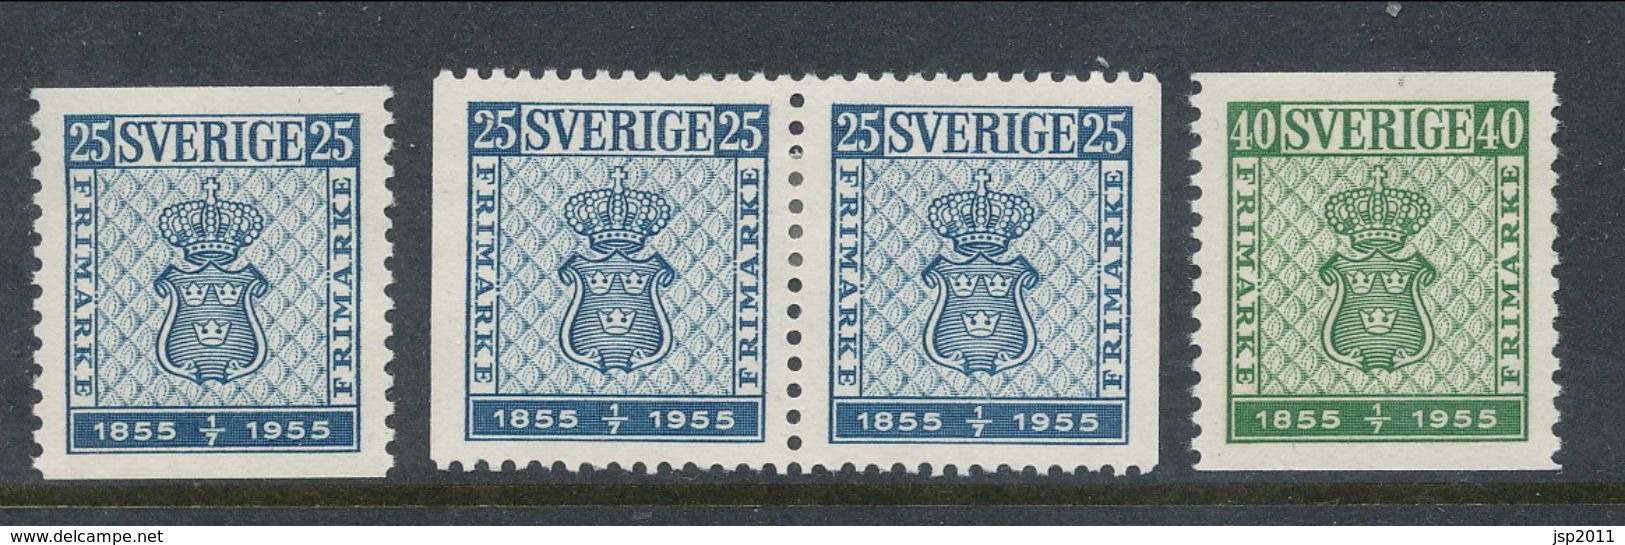 Sweden 1955 Facit # 467-468.  Centenary Of The First Swedish Postage Stamps, MNH(**) - Ungebraucht